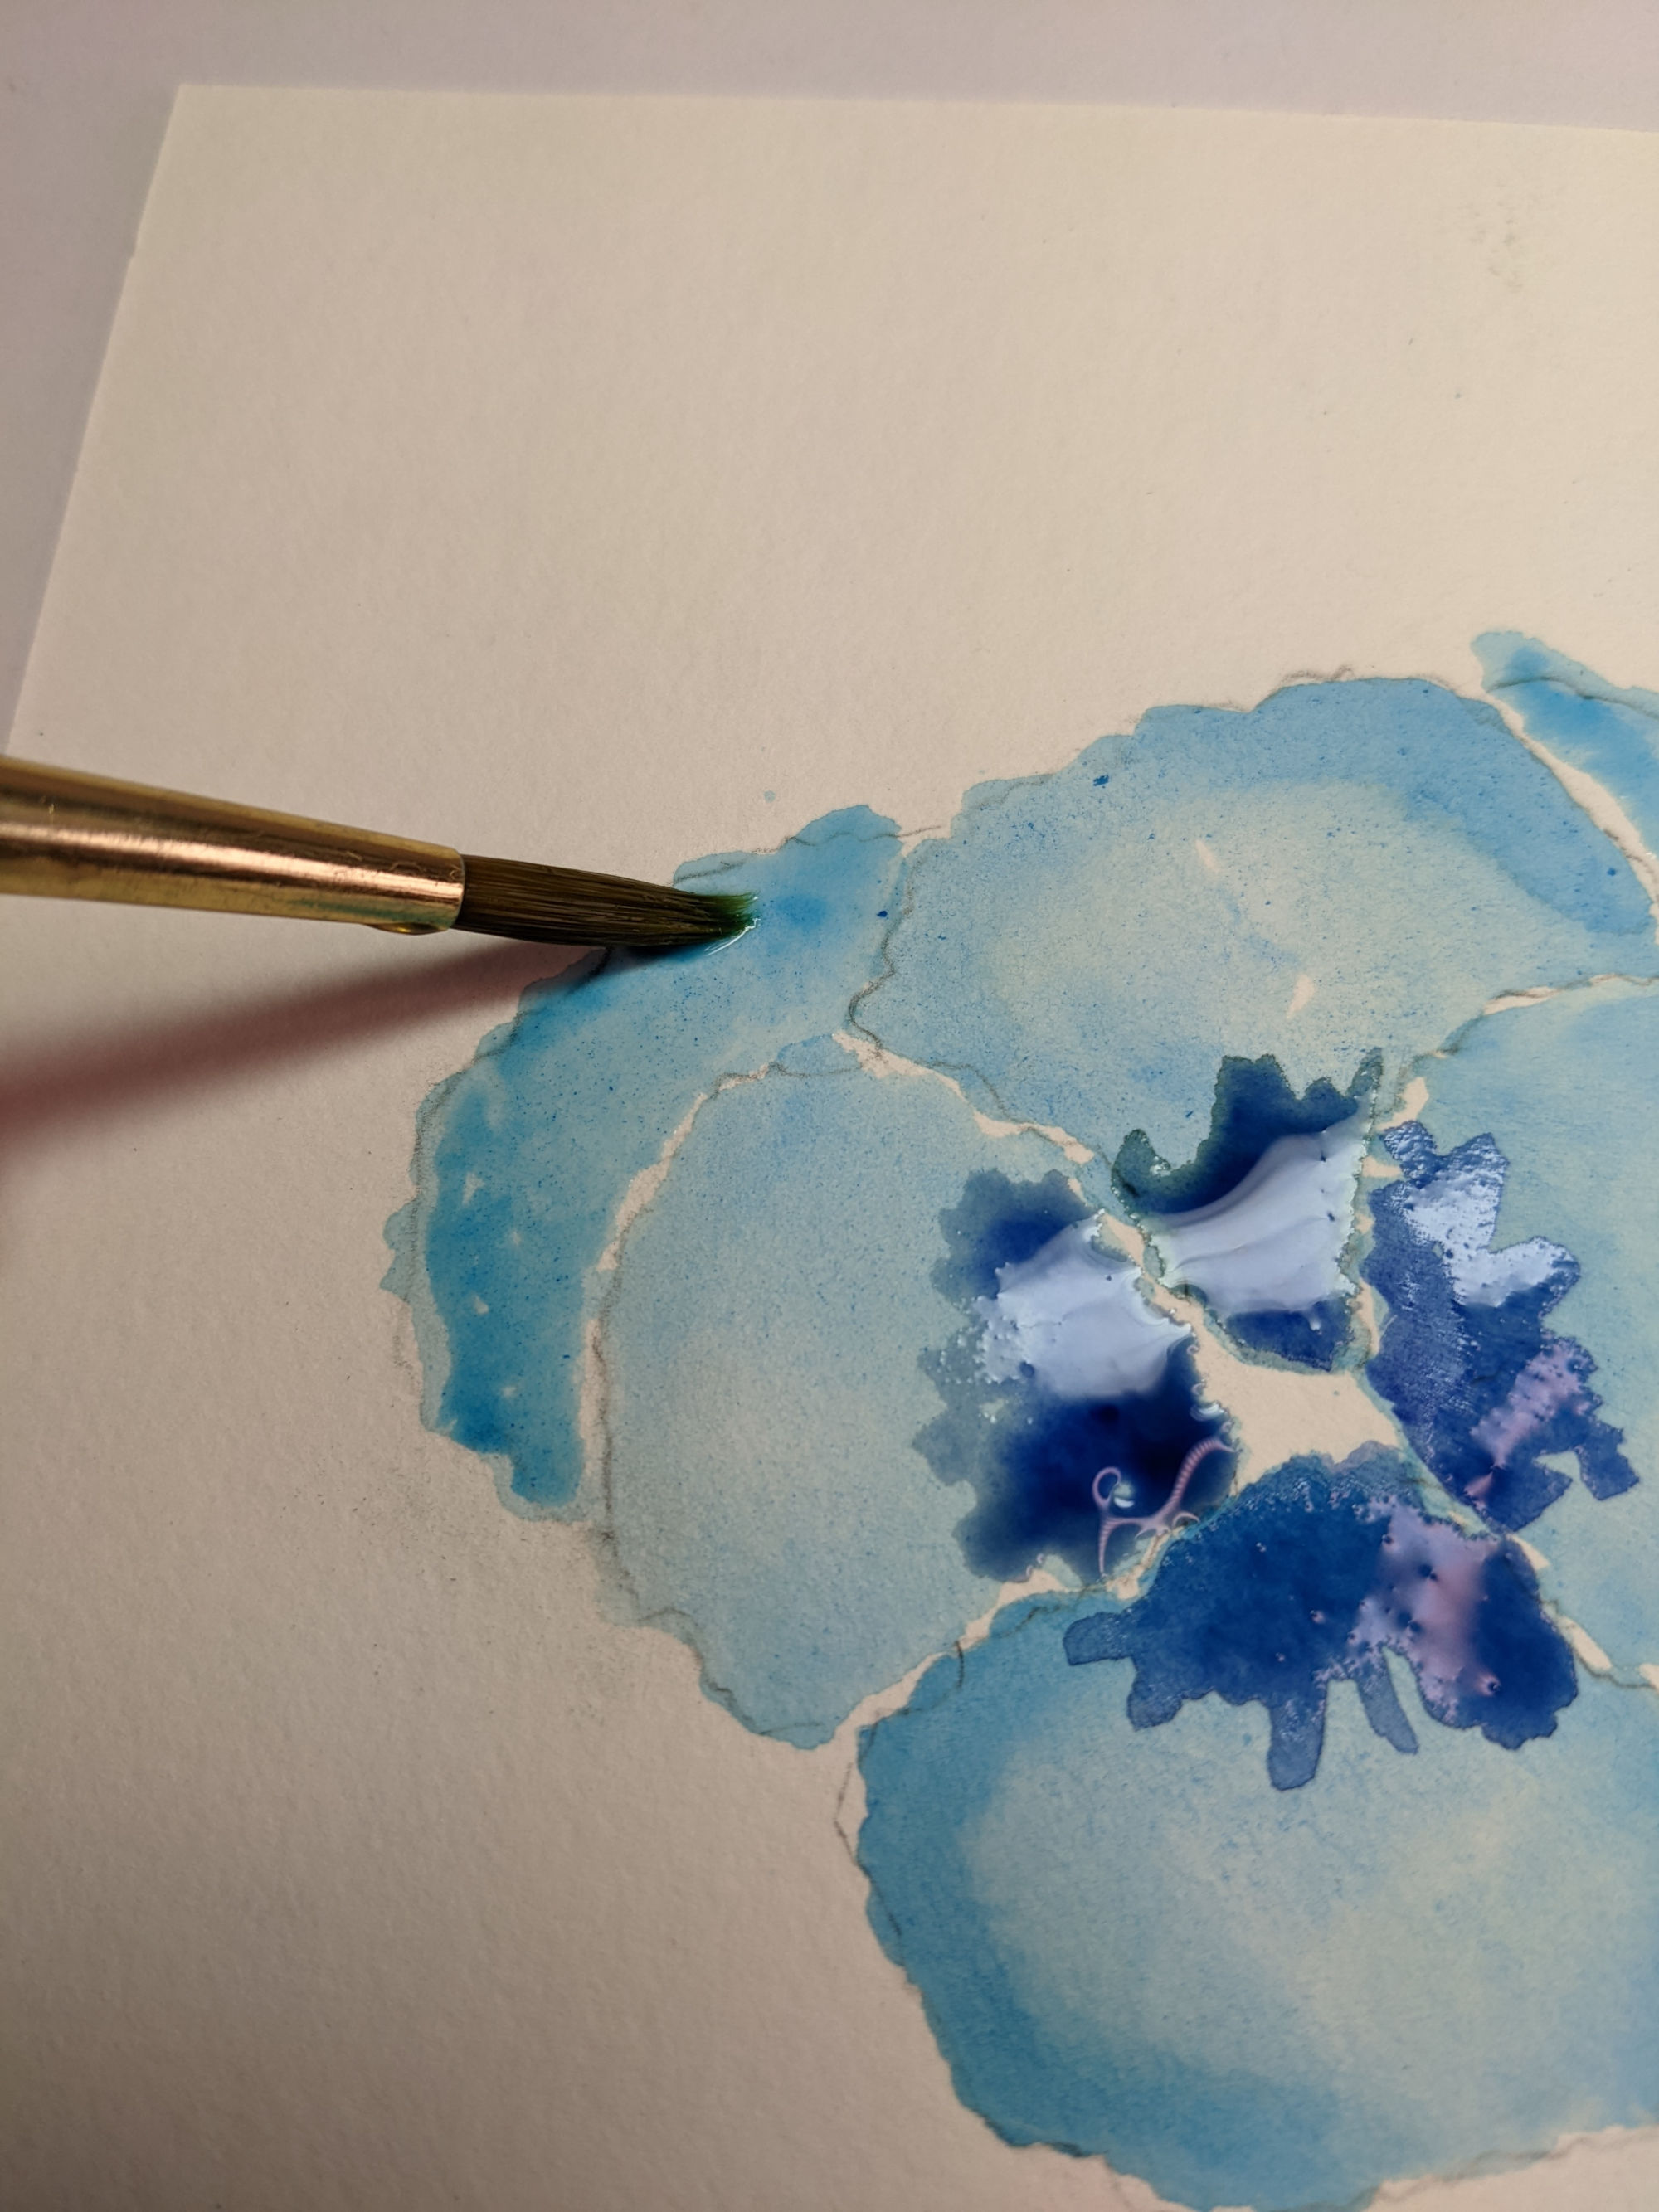 Deepening watercolor tones on a blue abstract flower painting